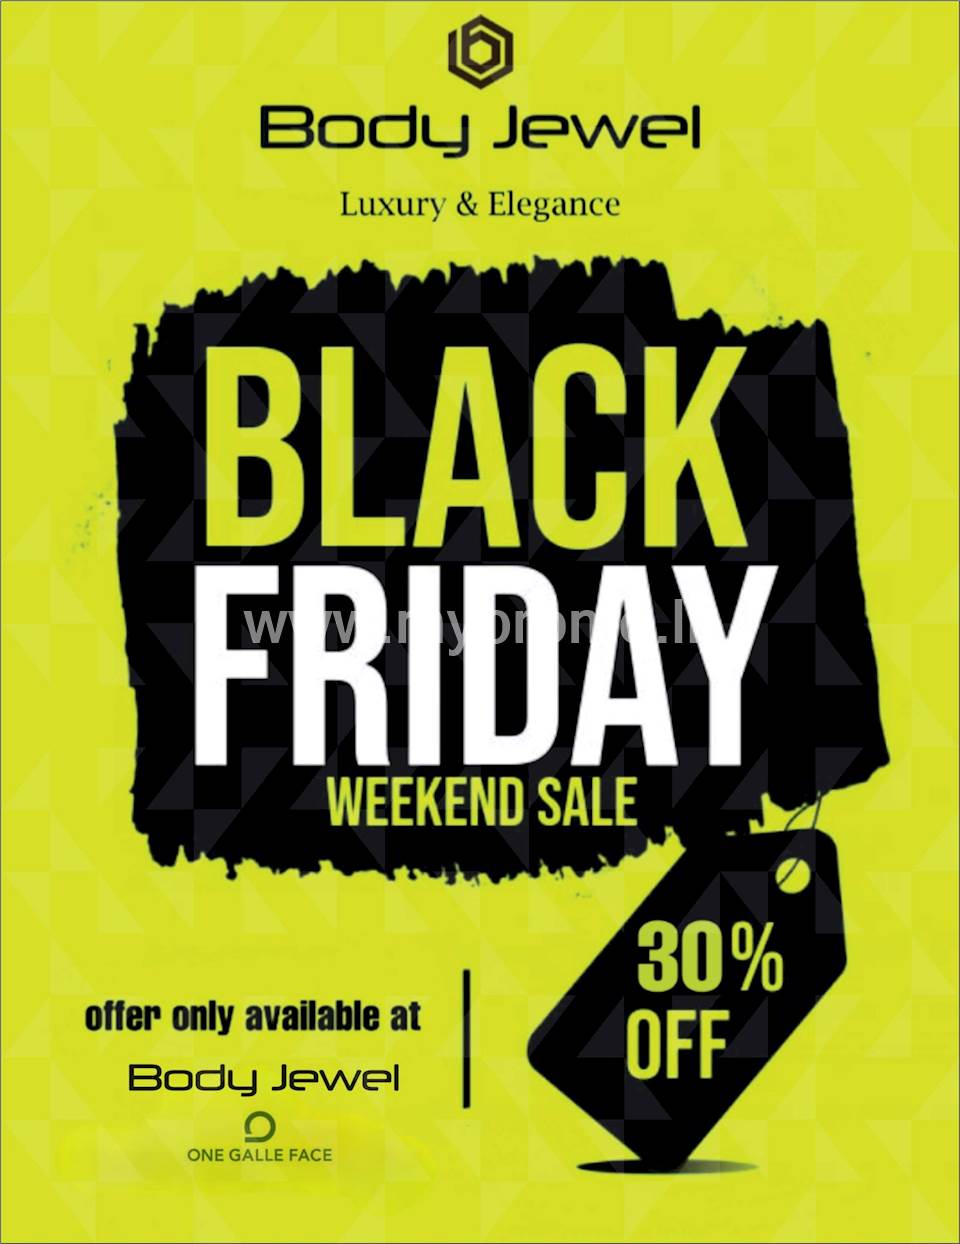 30% discount at Body Jewel at One Galle Face Mall for this Black Friday weekend